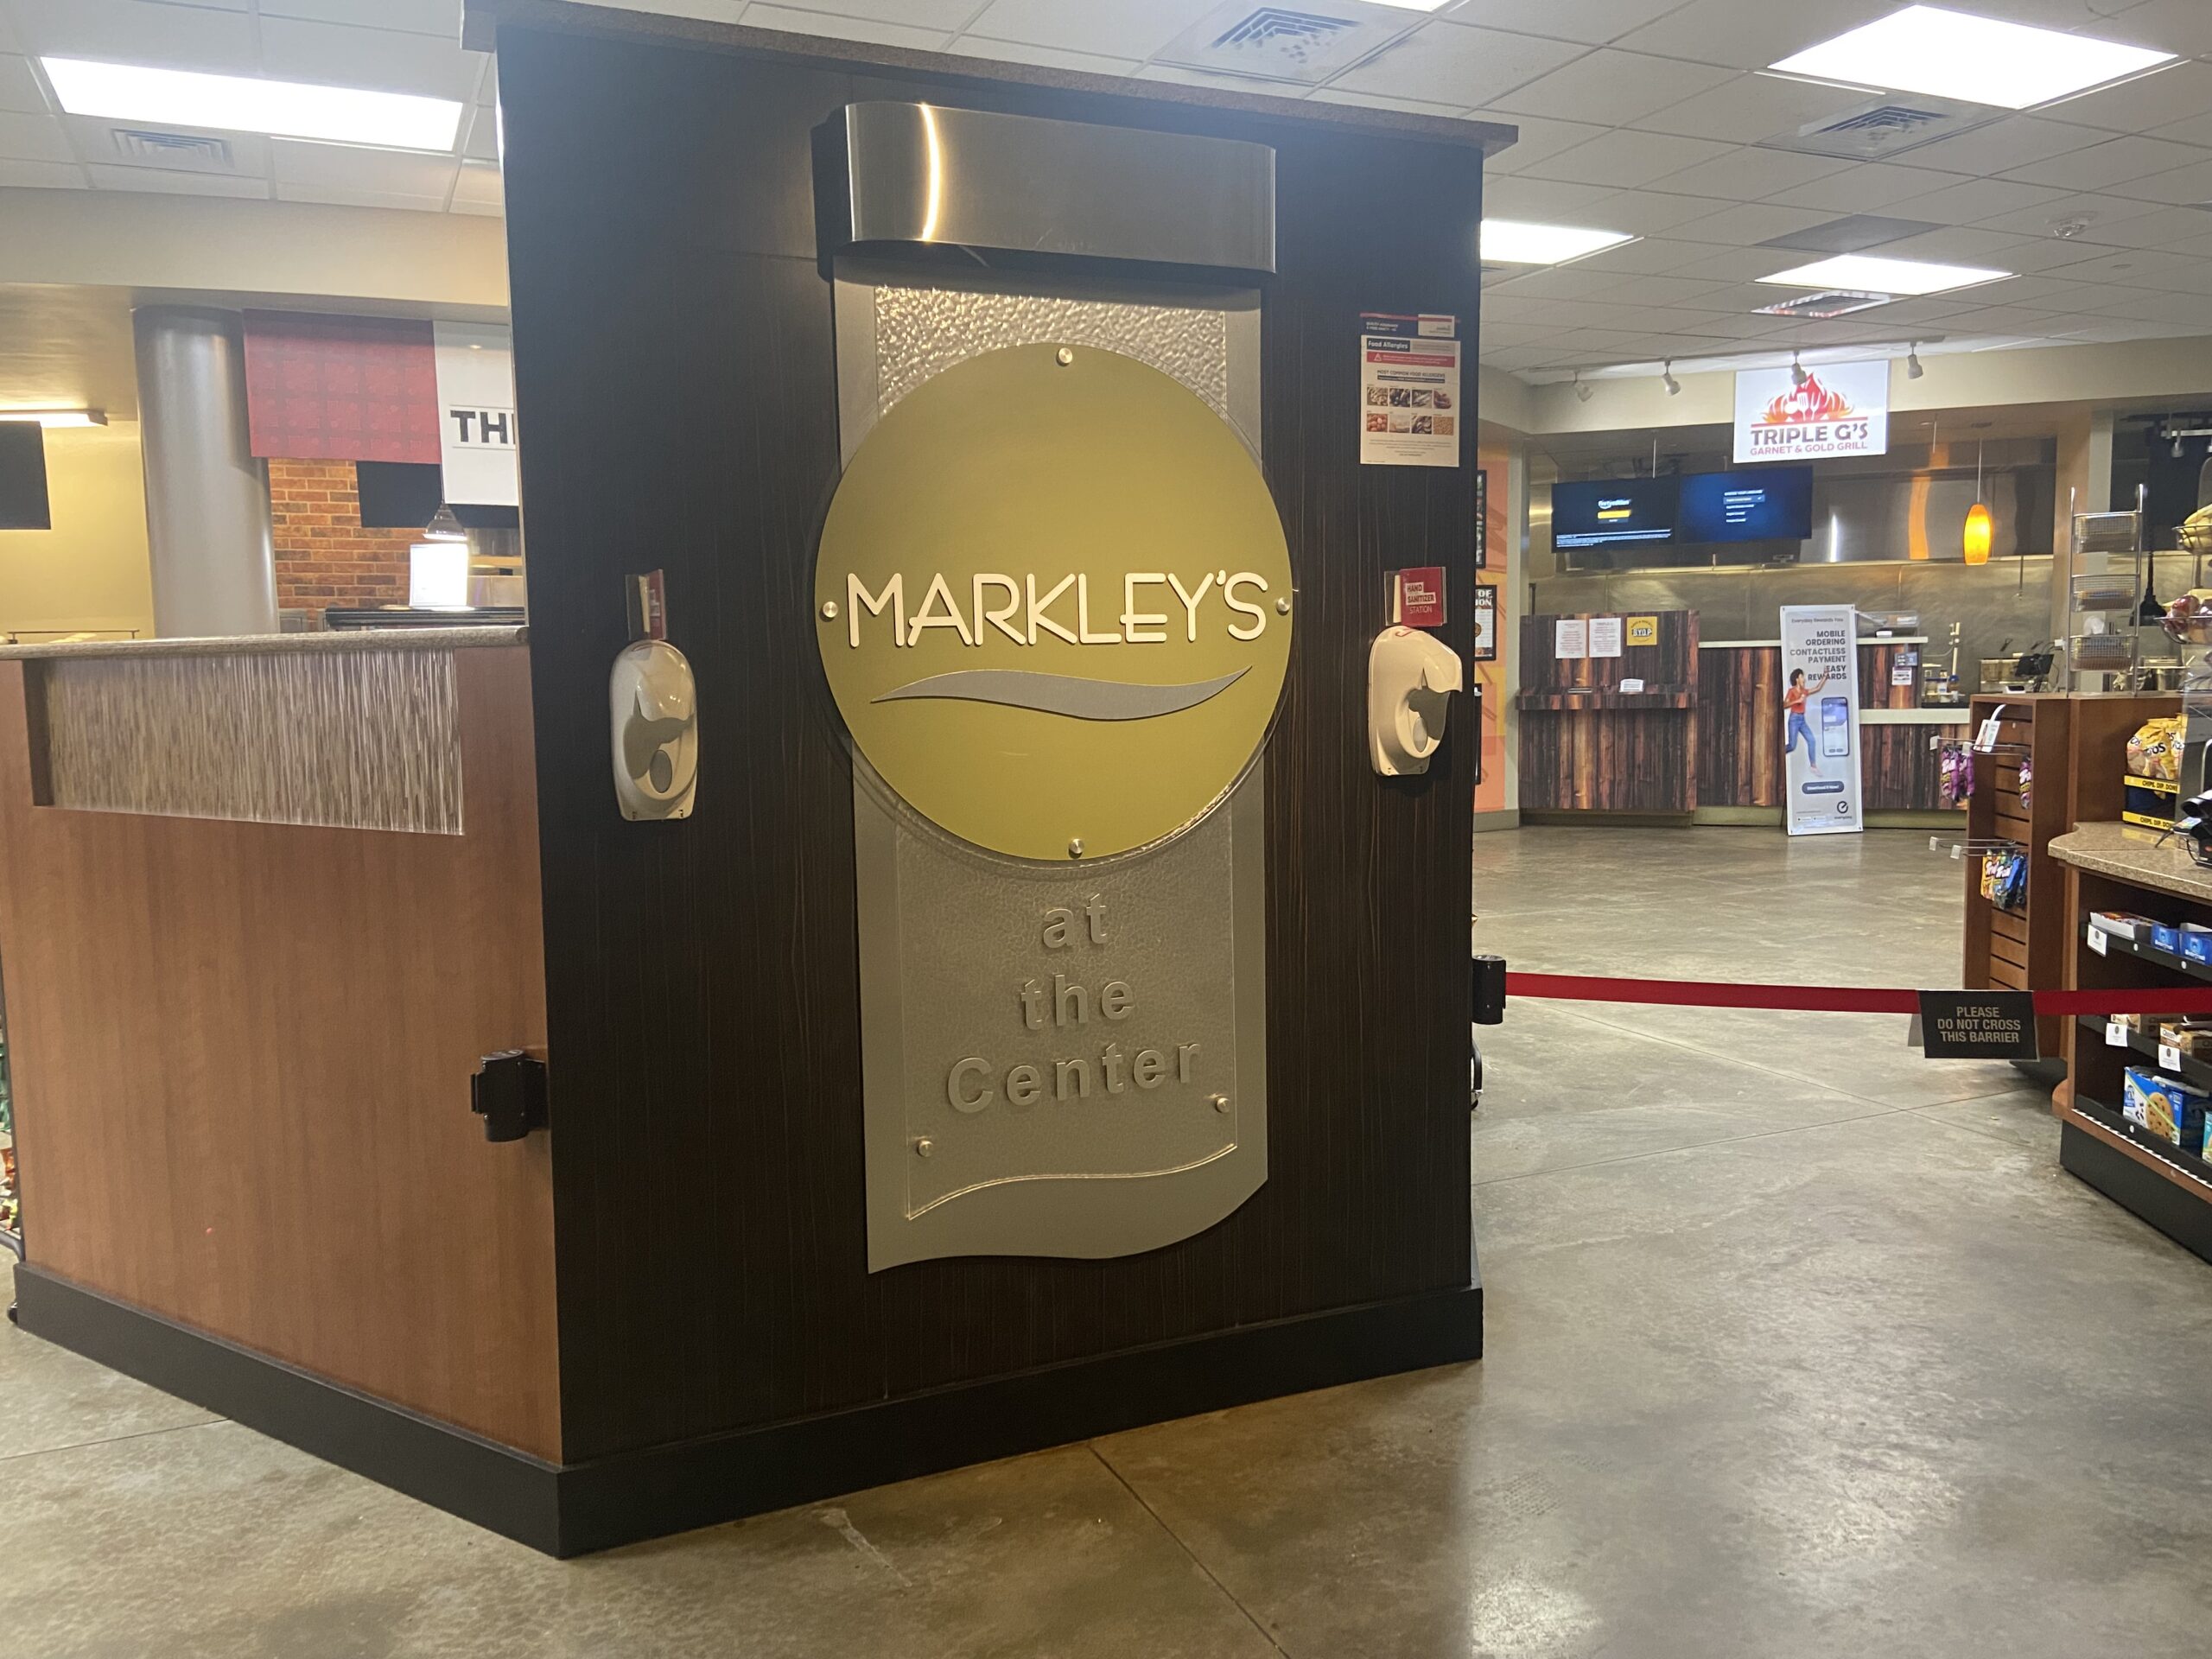 Markley’s and Eagle Eatery gain new dining facilities and upgrades